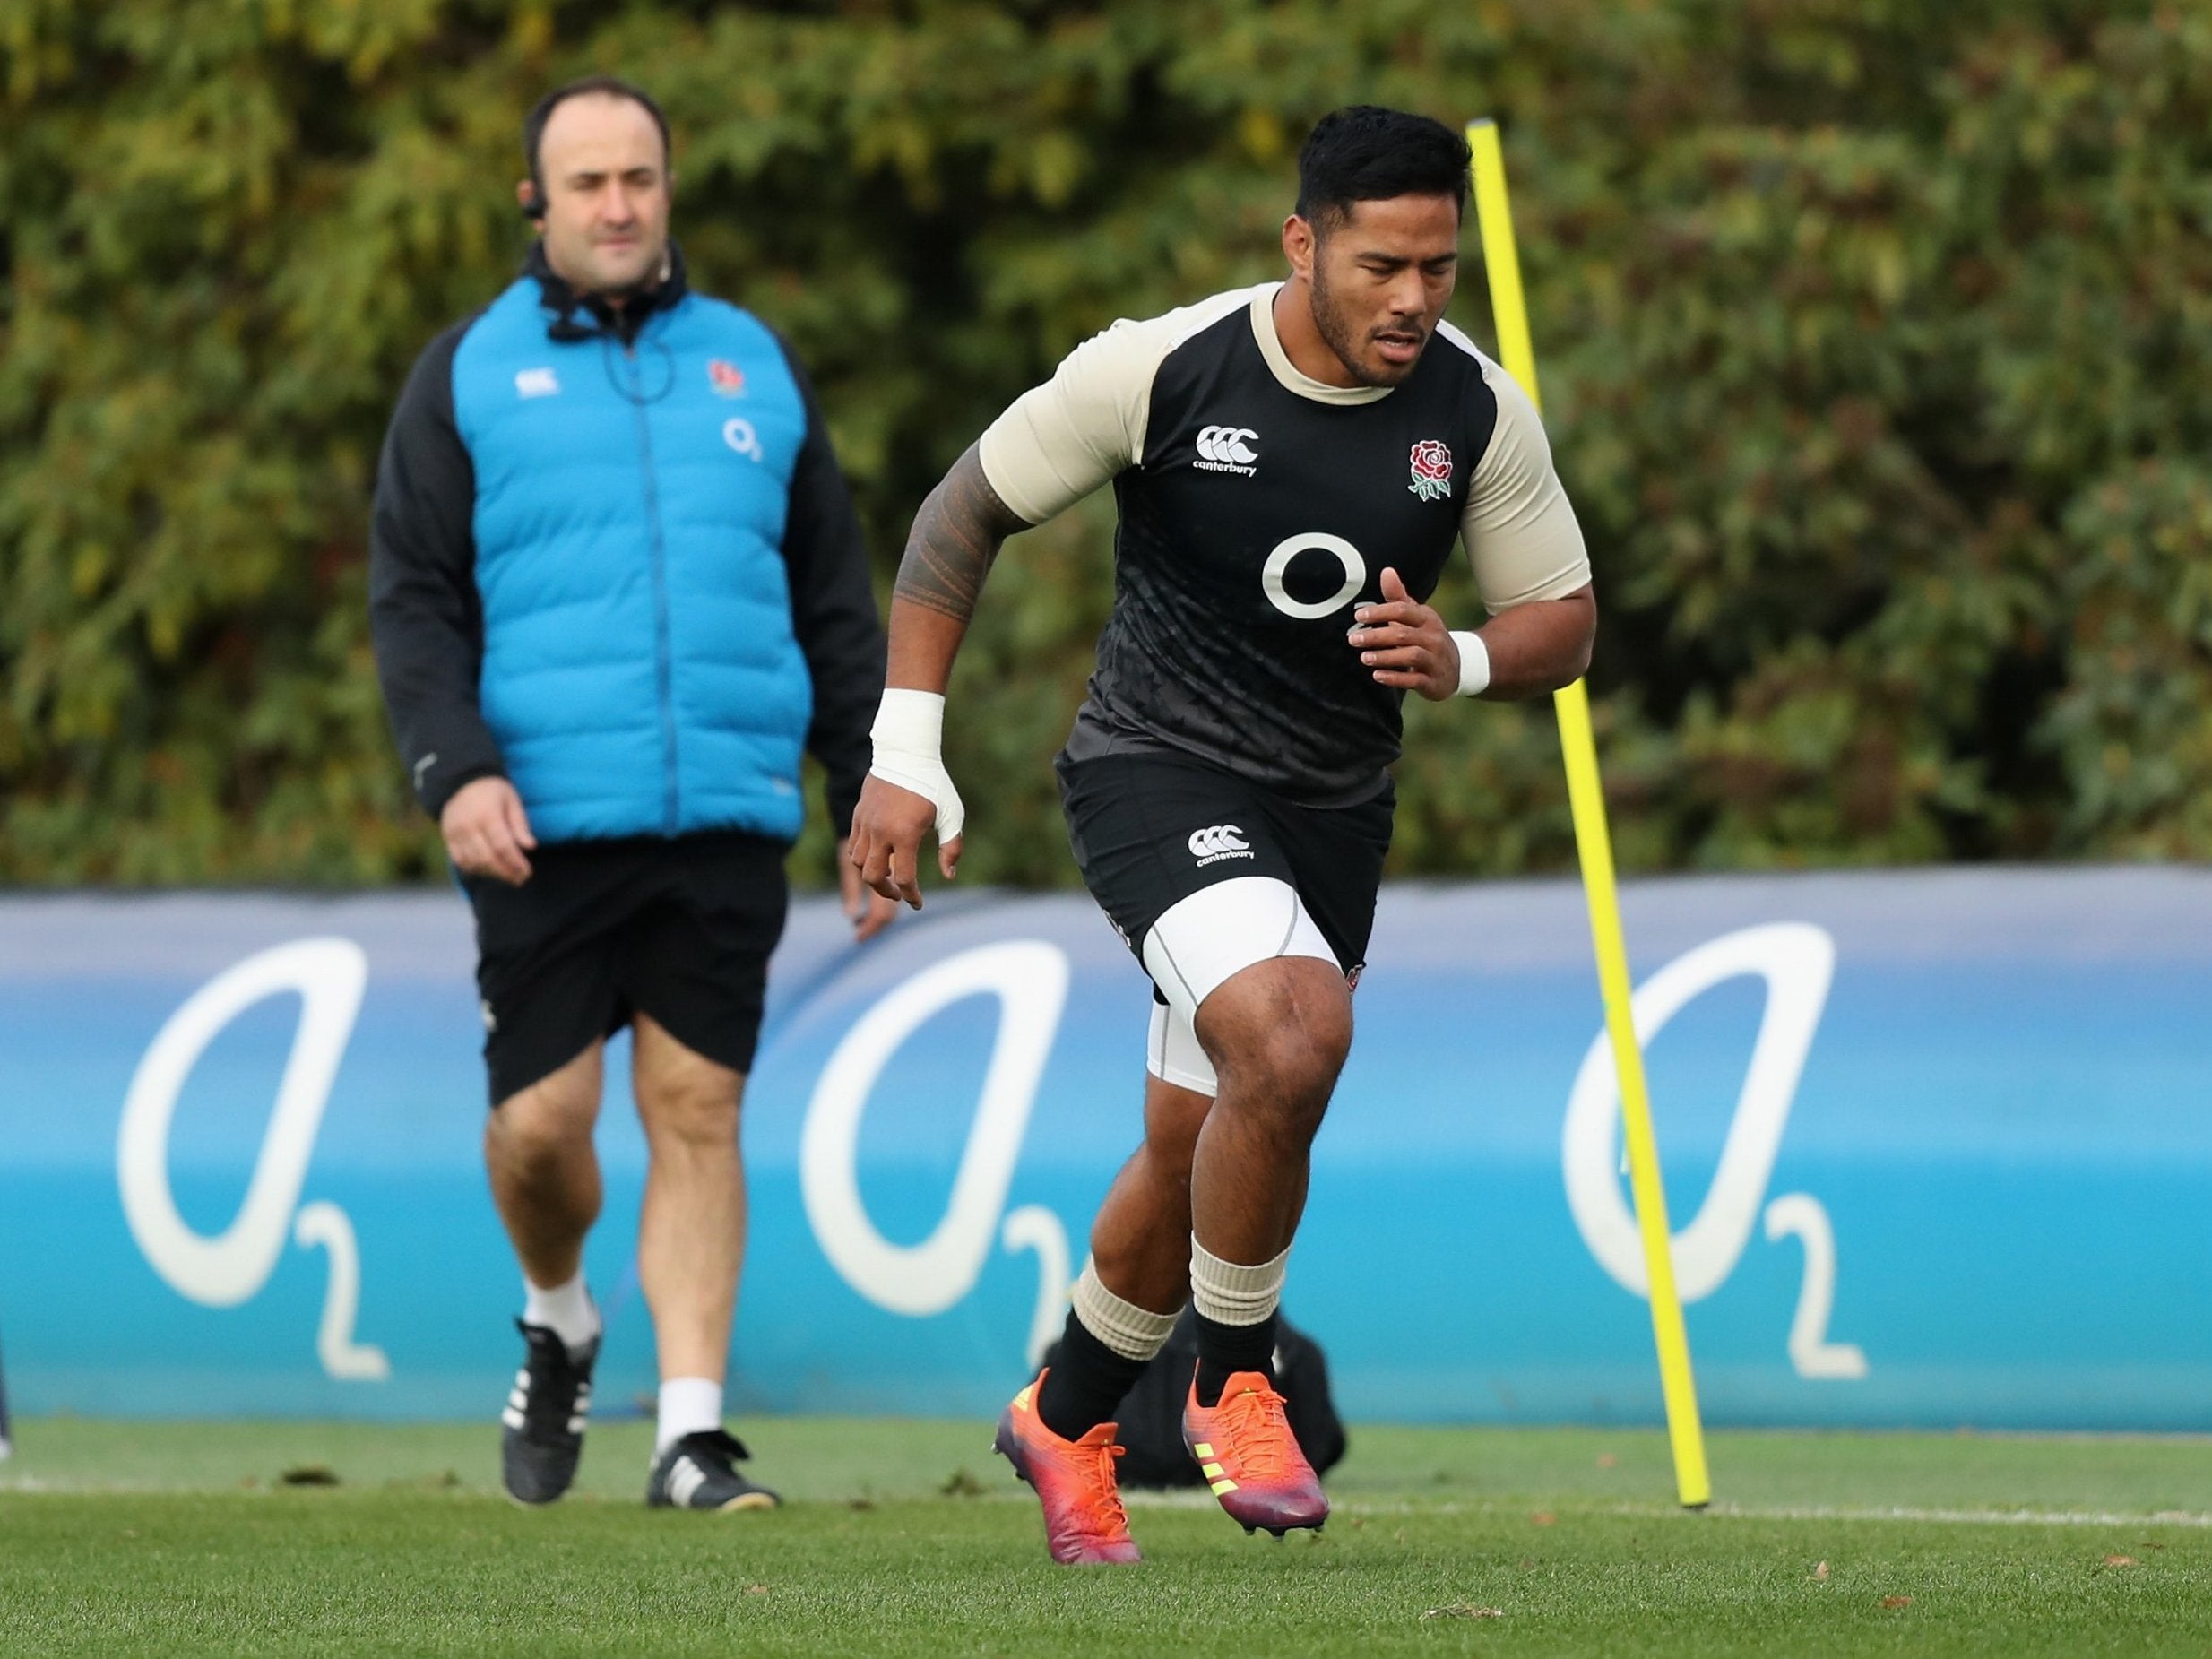 Tuilagi has not played for England since March 2016